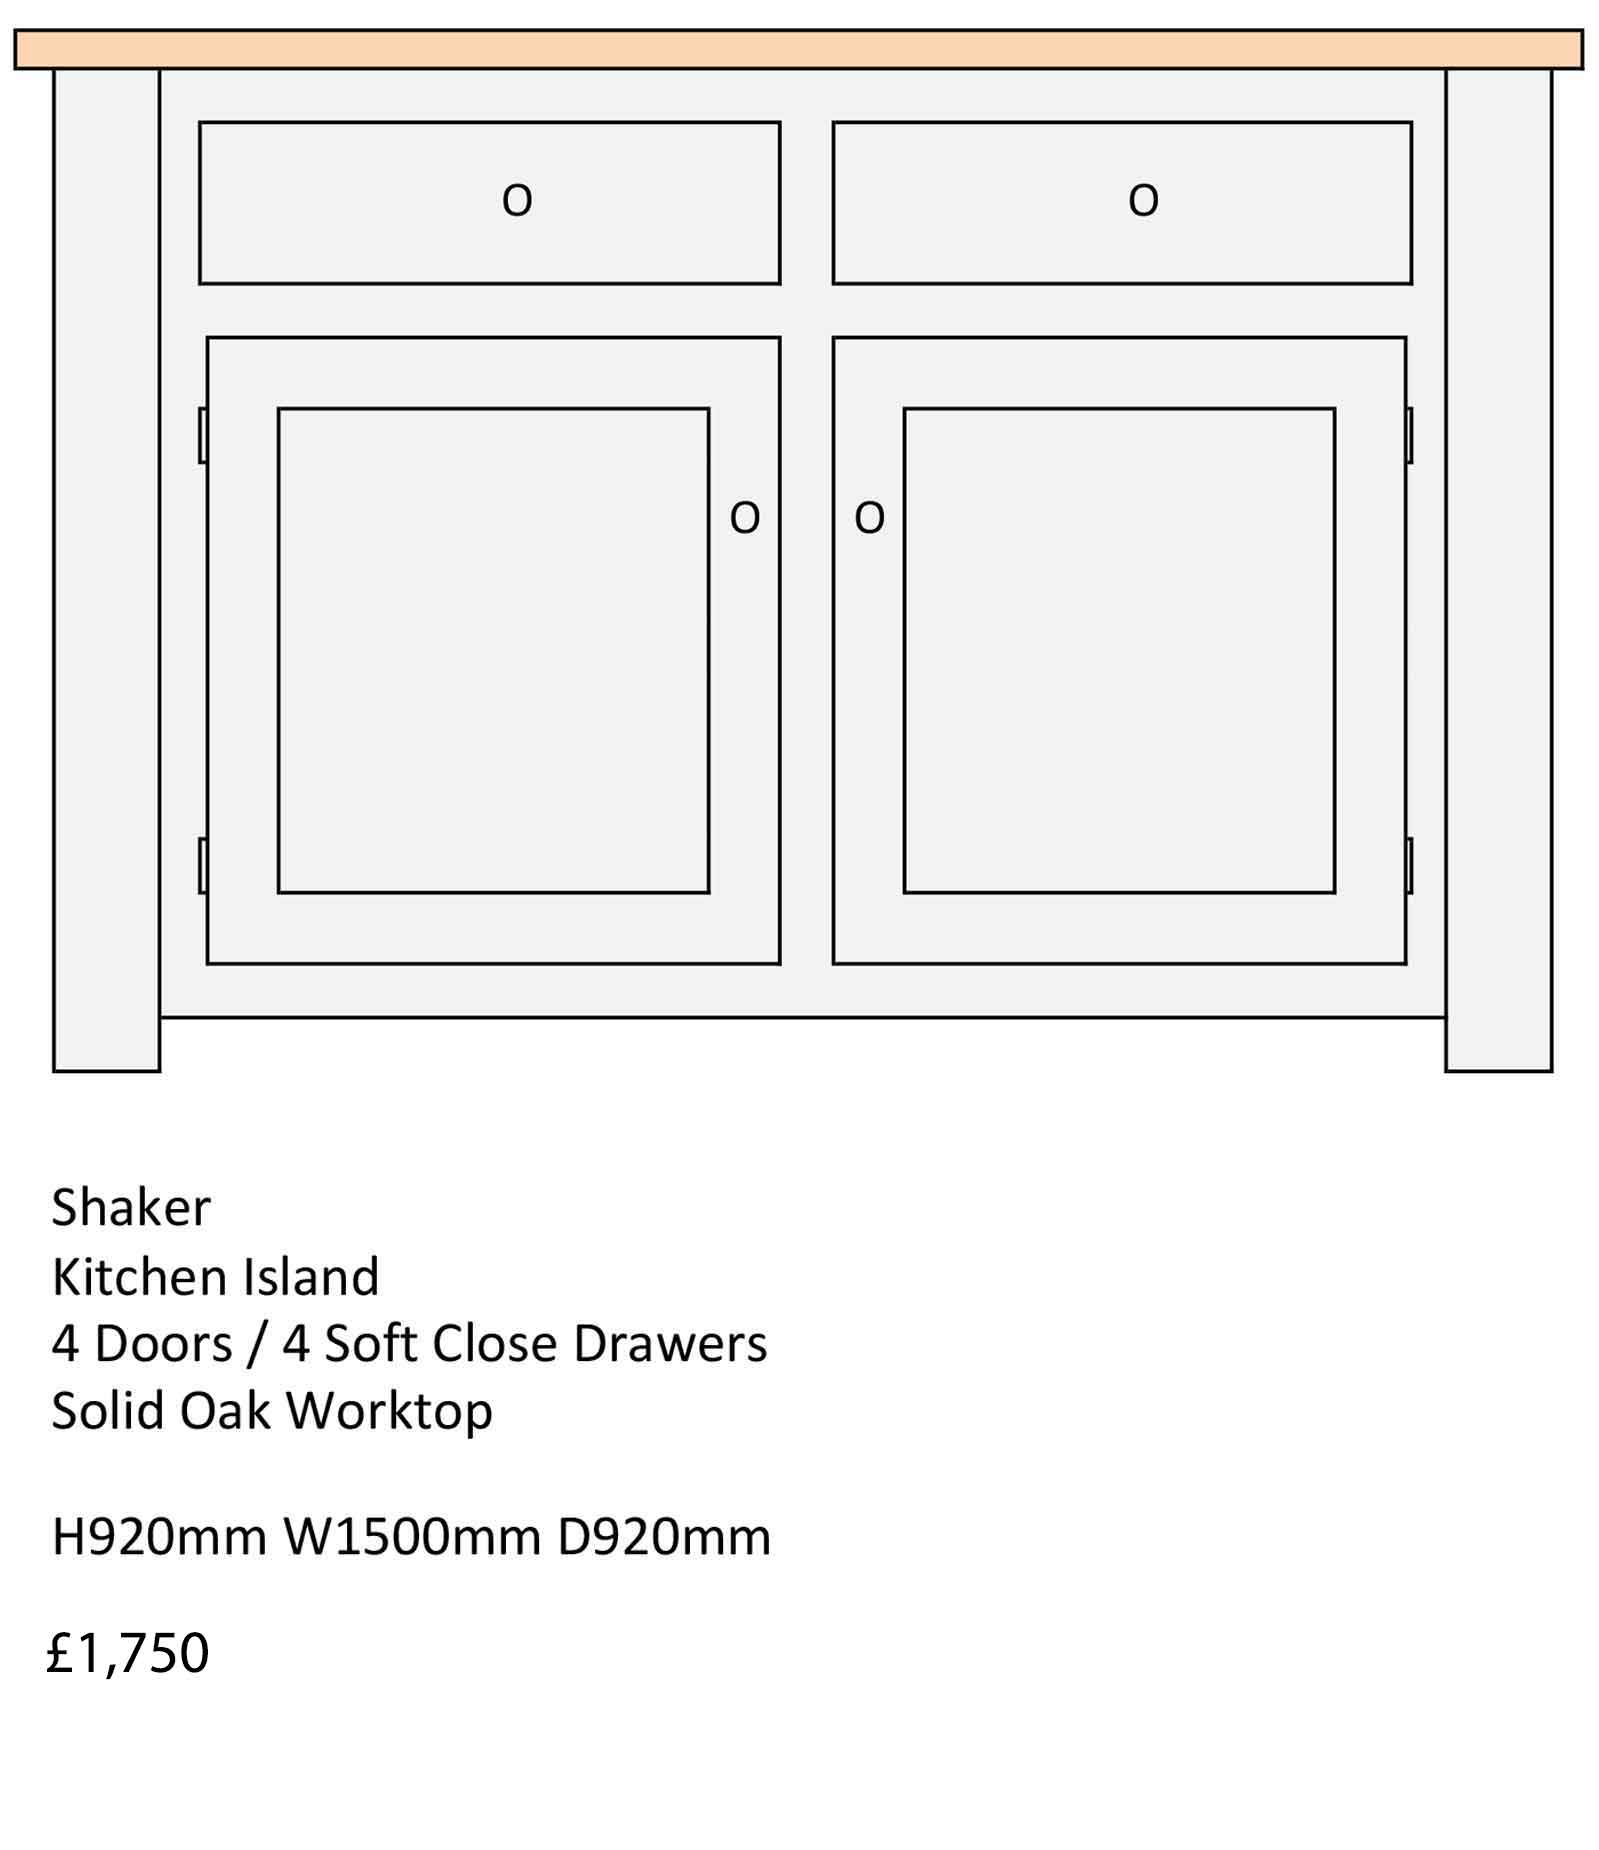 Shaker kitchen island with a Solid Oak Workstop, handmade from Bramble Tree Kitchens